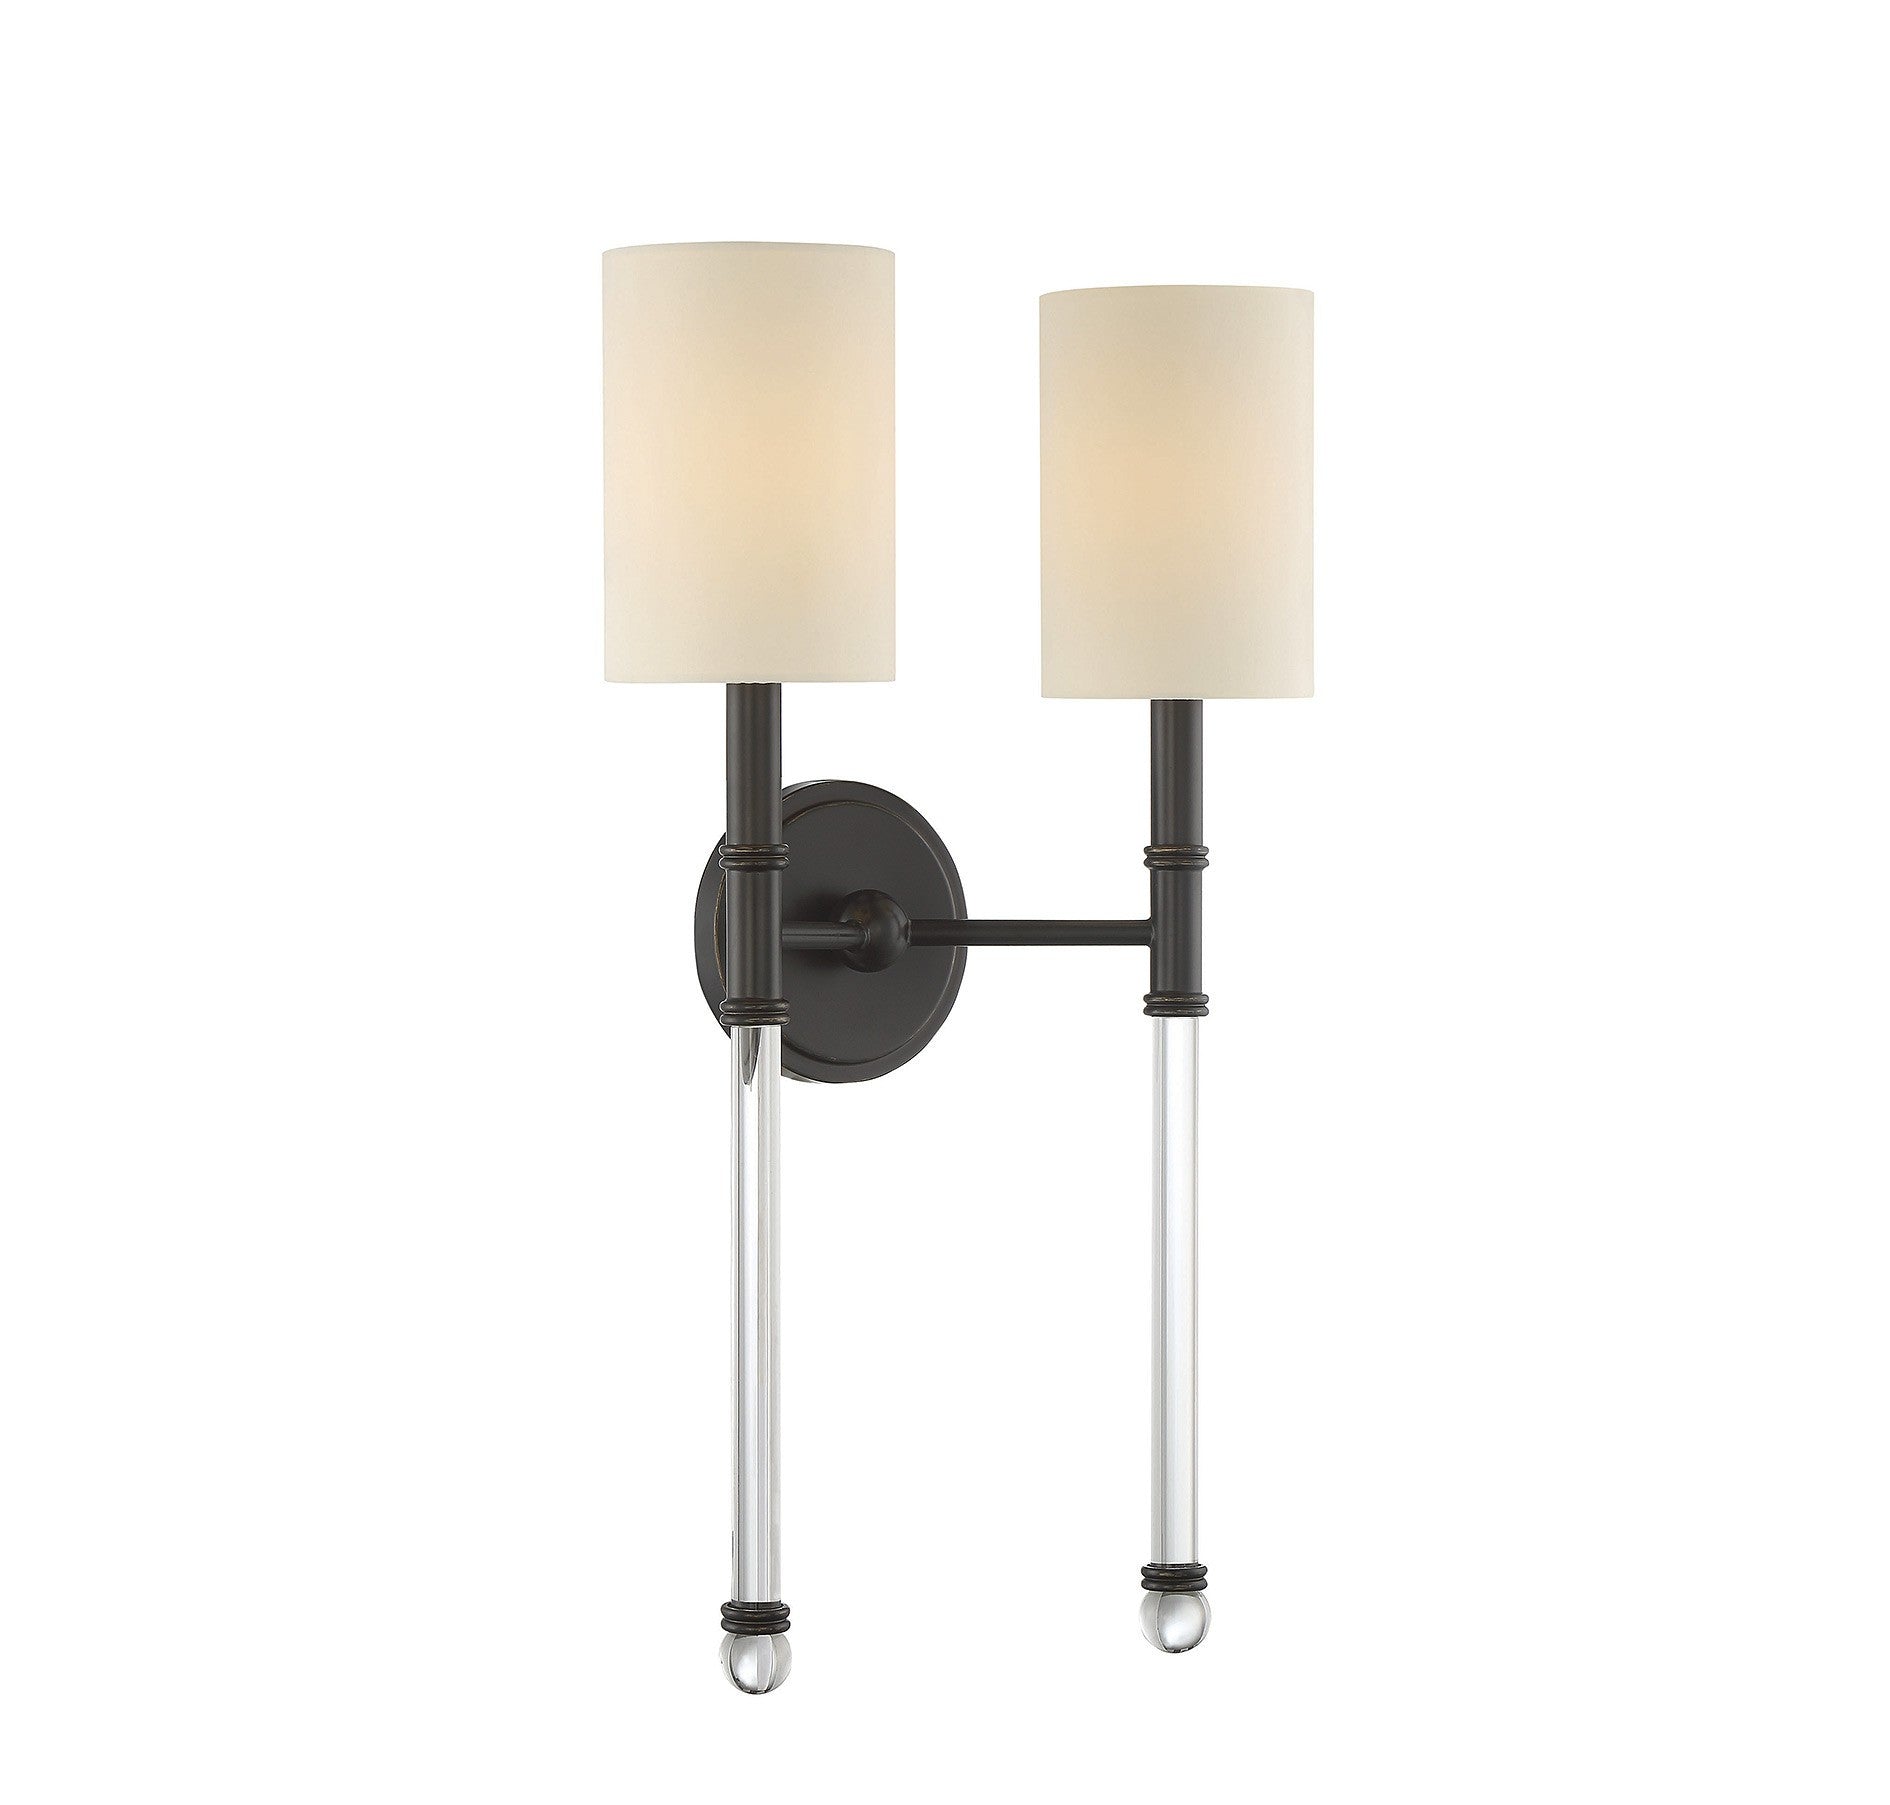 Savoy House Fremont 2 Light Wall Sconce in Polished Nickel and Soft White Fabric Shade 9-103-2-109